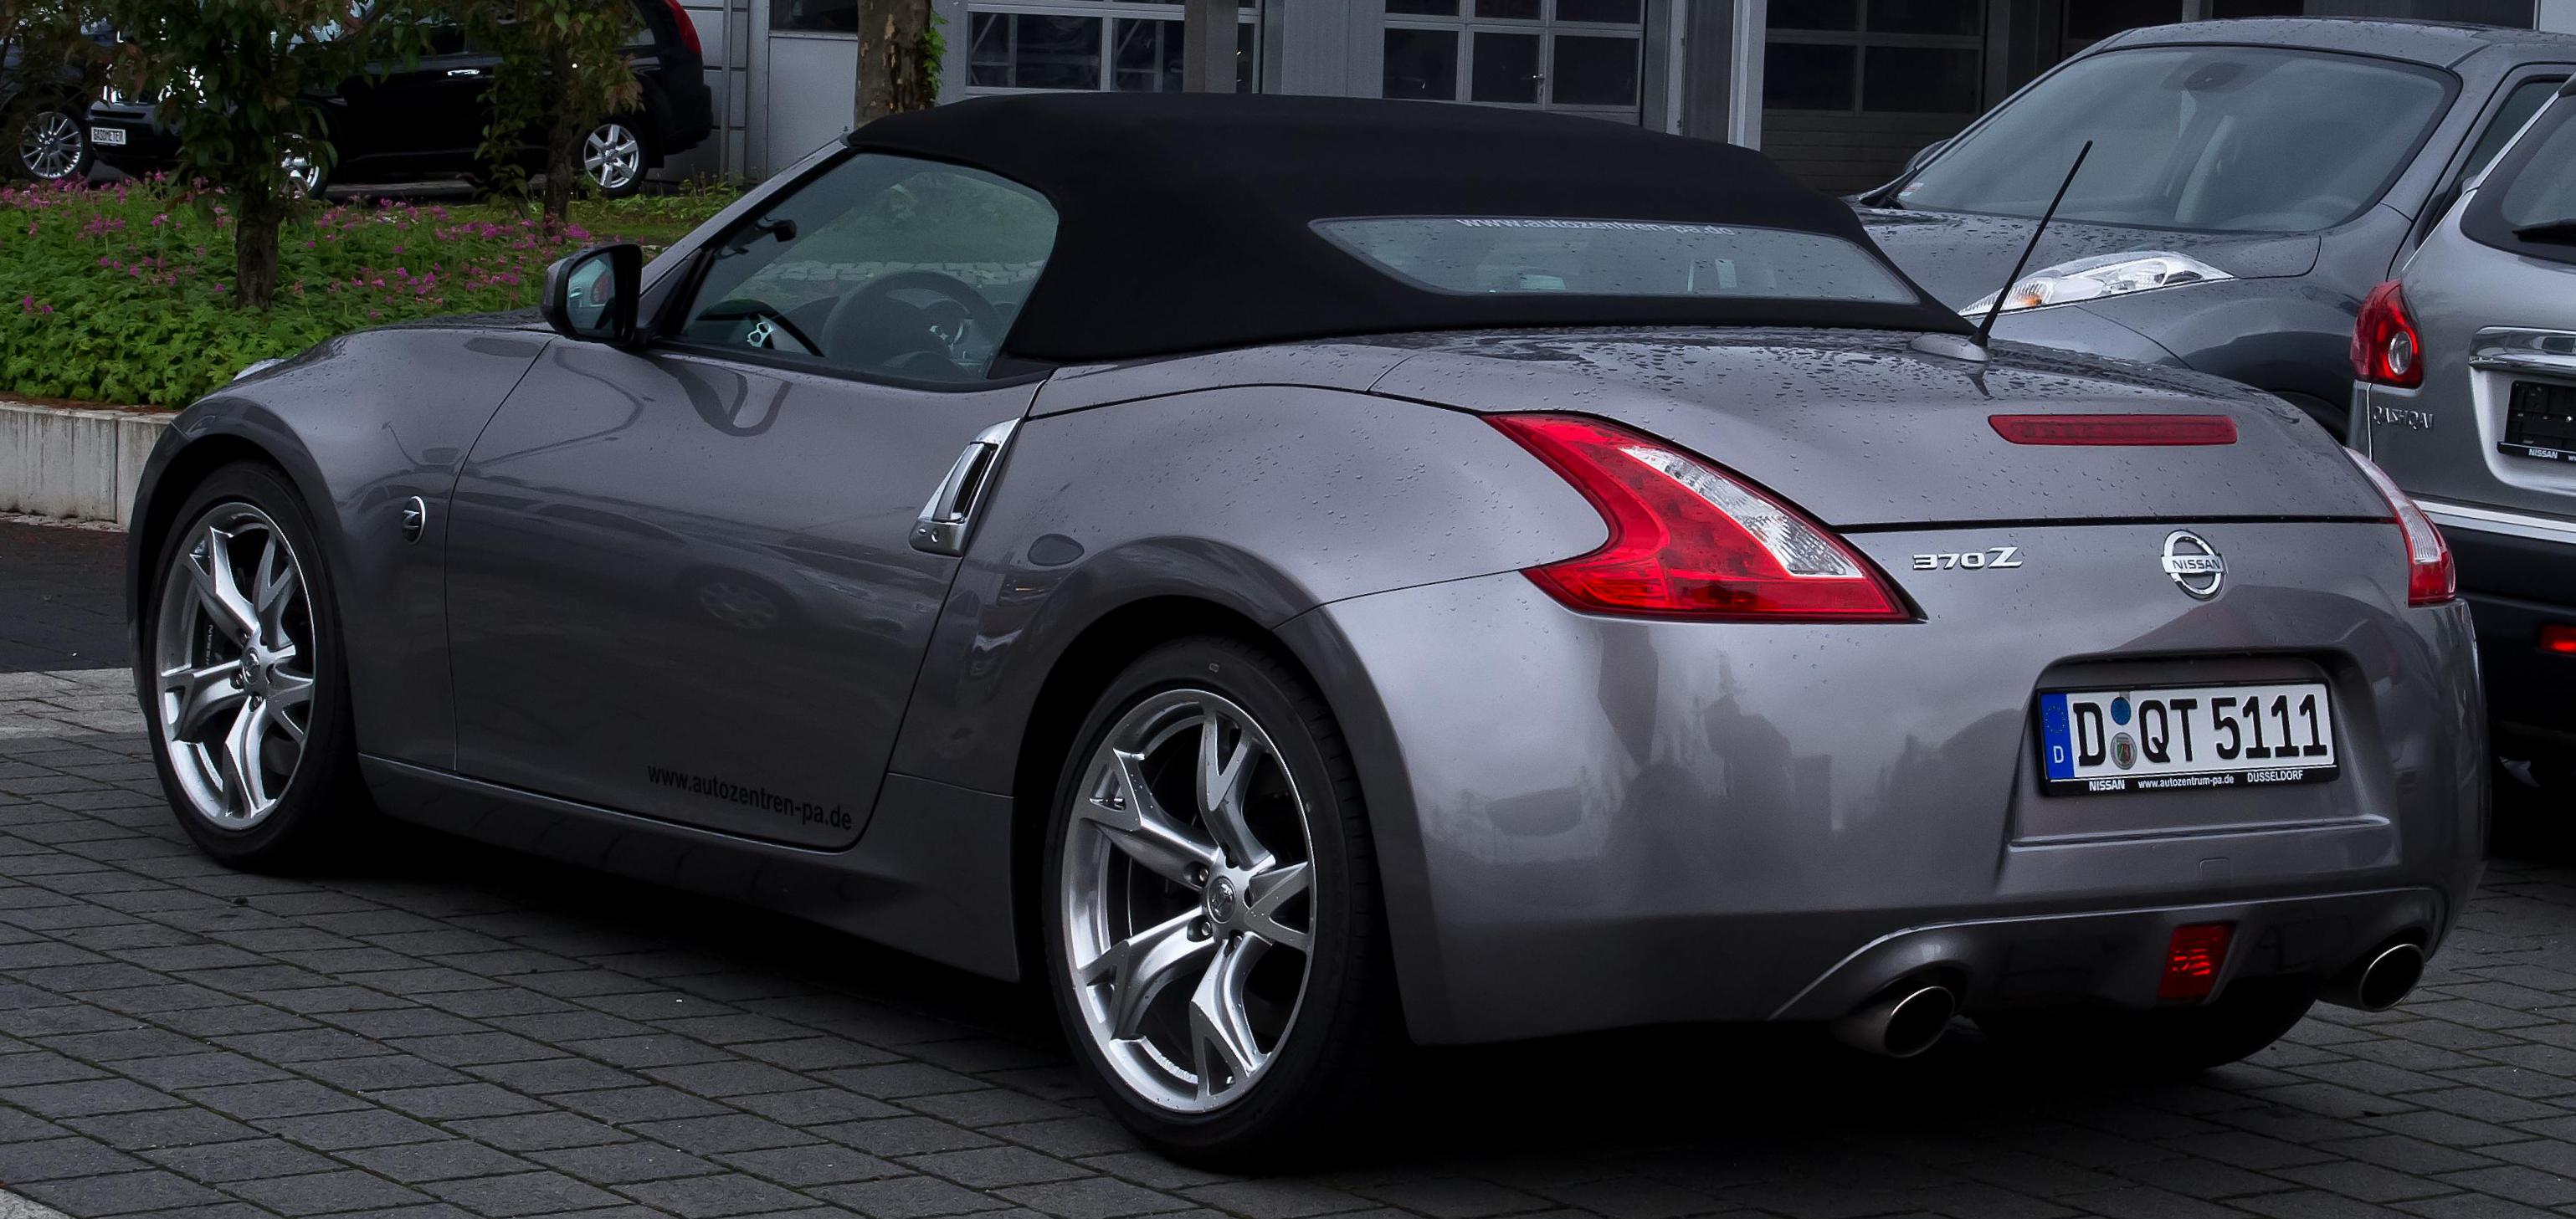 Nissan 370z Roadster Photos And Specs Photo Nissan 370z Roadster Auto And 25 Perfect Photos Of Nissan 370z Roadster